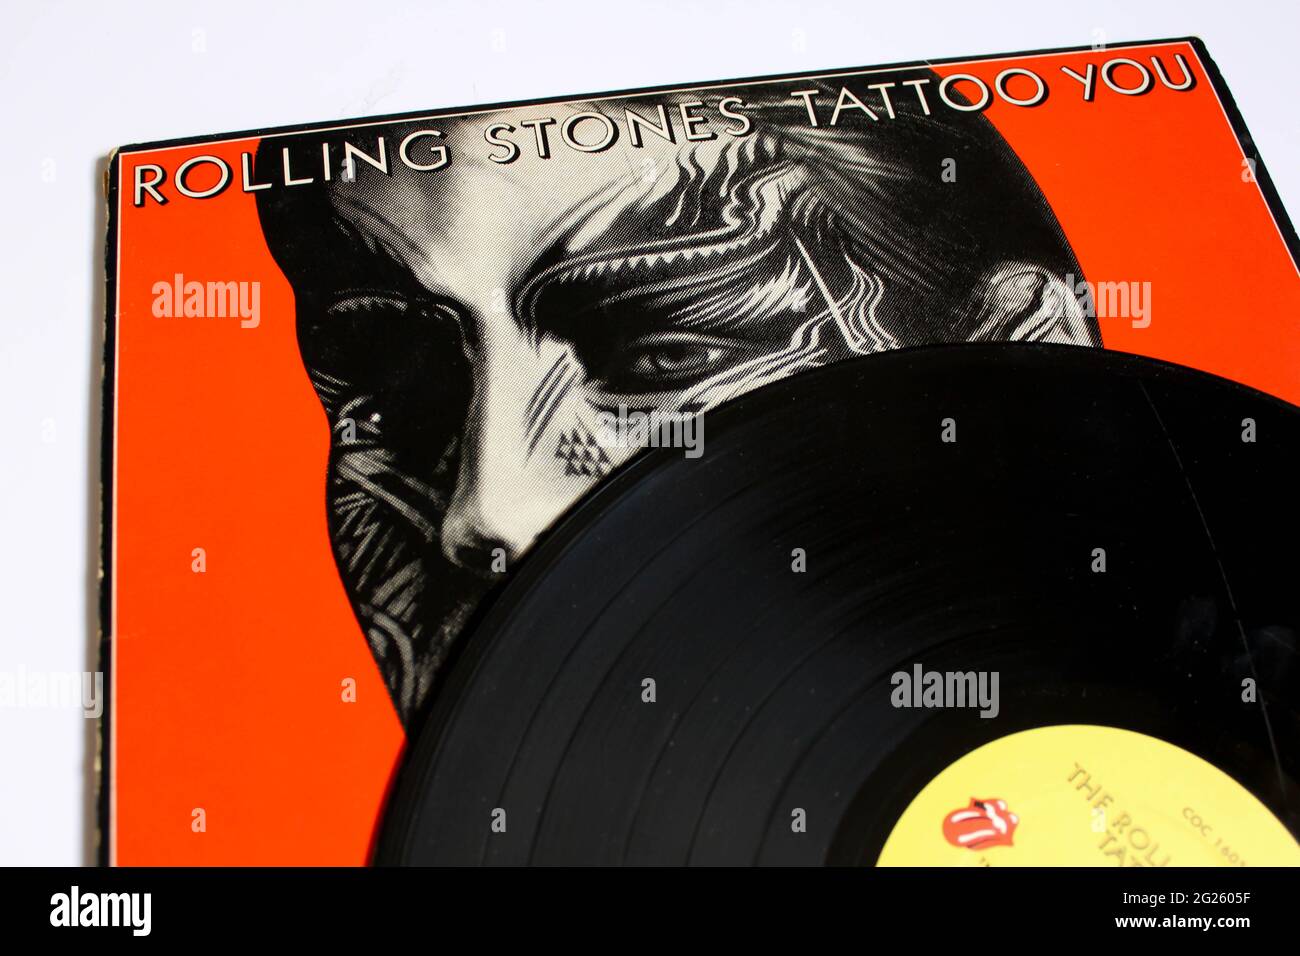 English rock band, The Rolling Stones music album on vinyl record LP disc. Titled: Tattoo You album cover Stock Photo